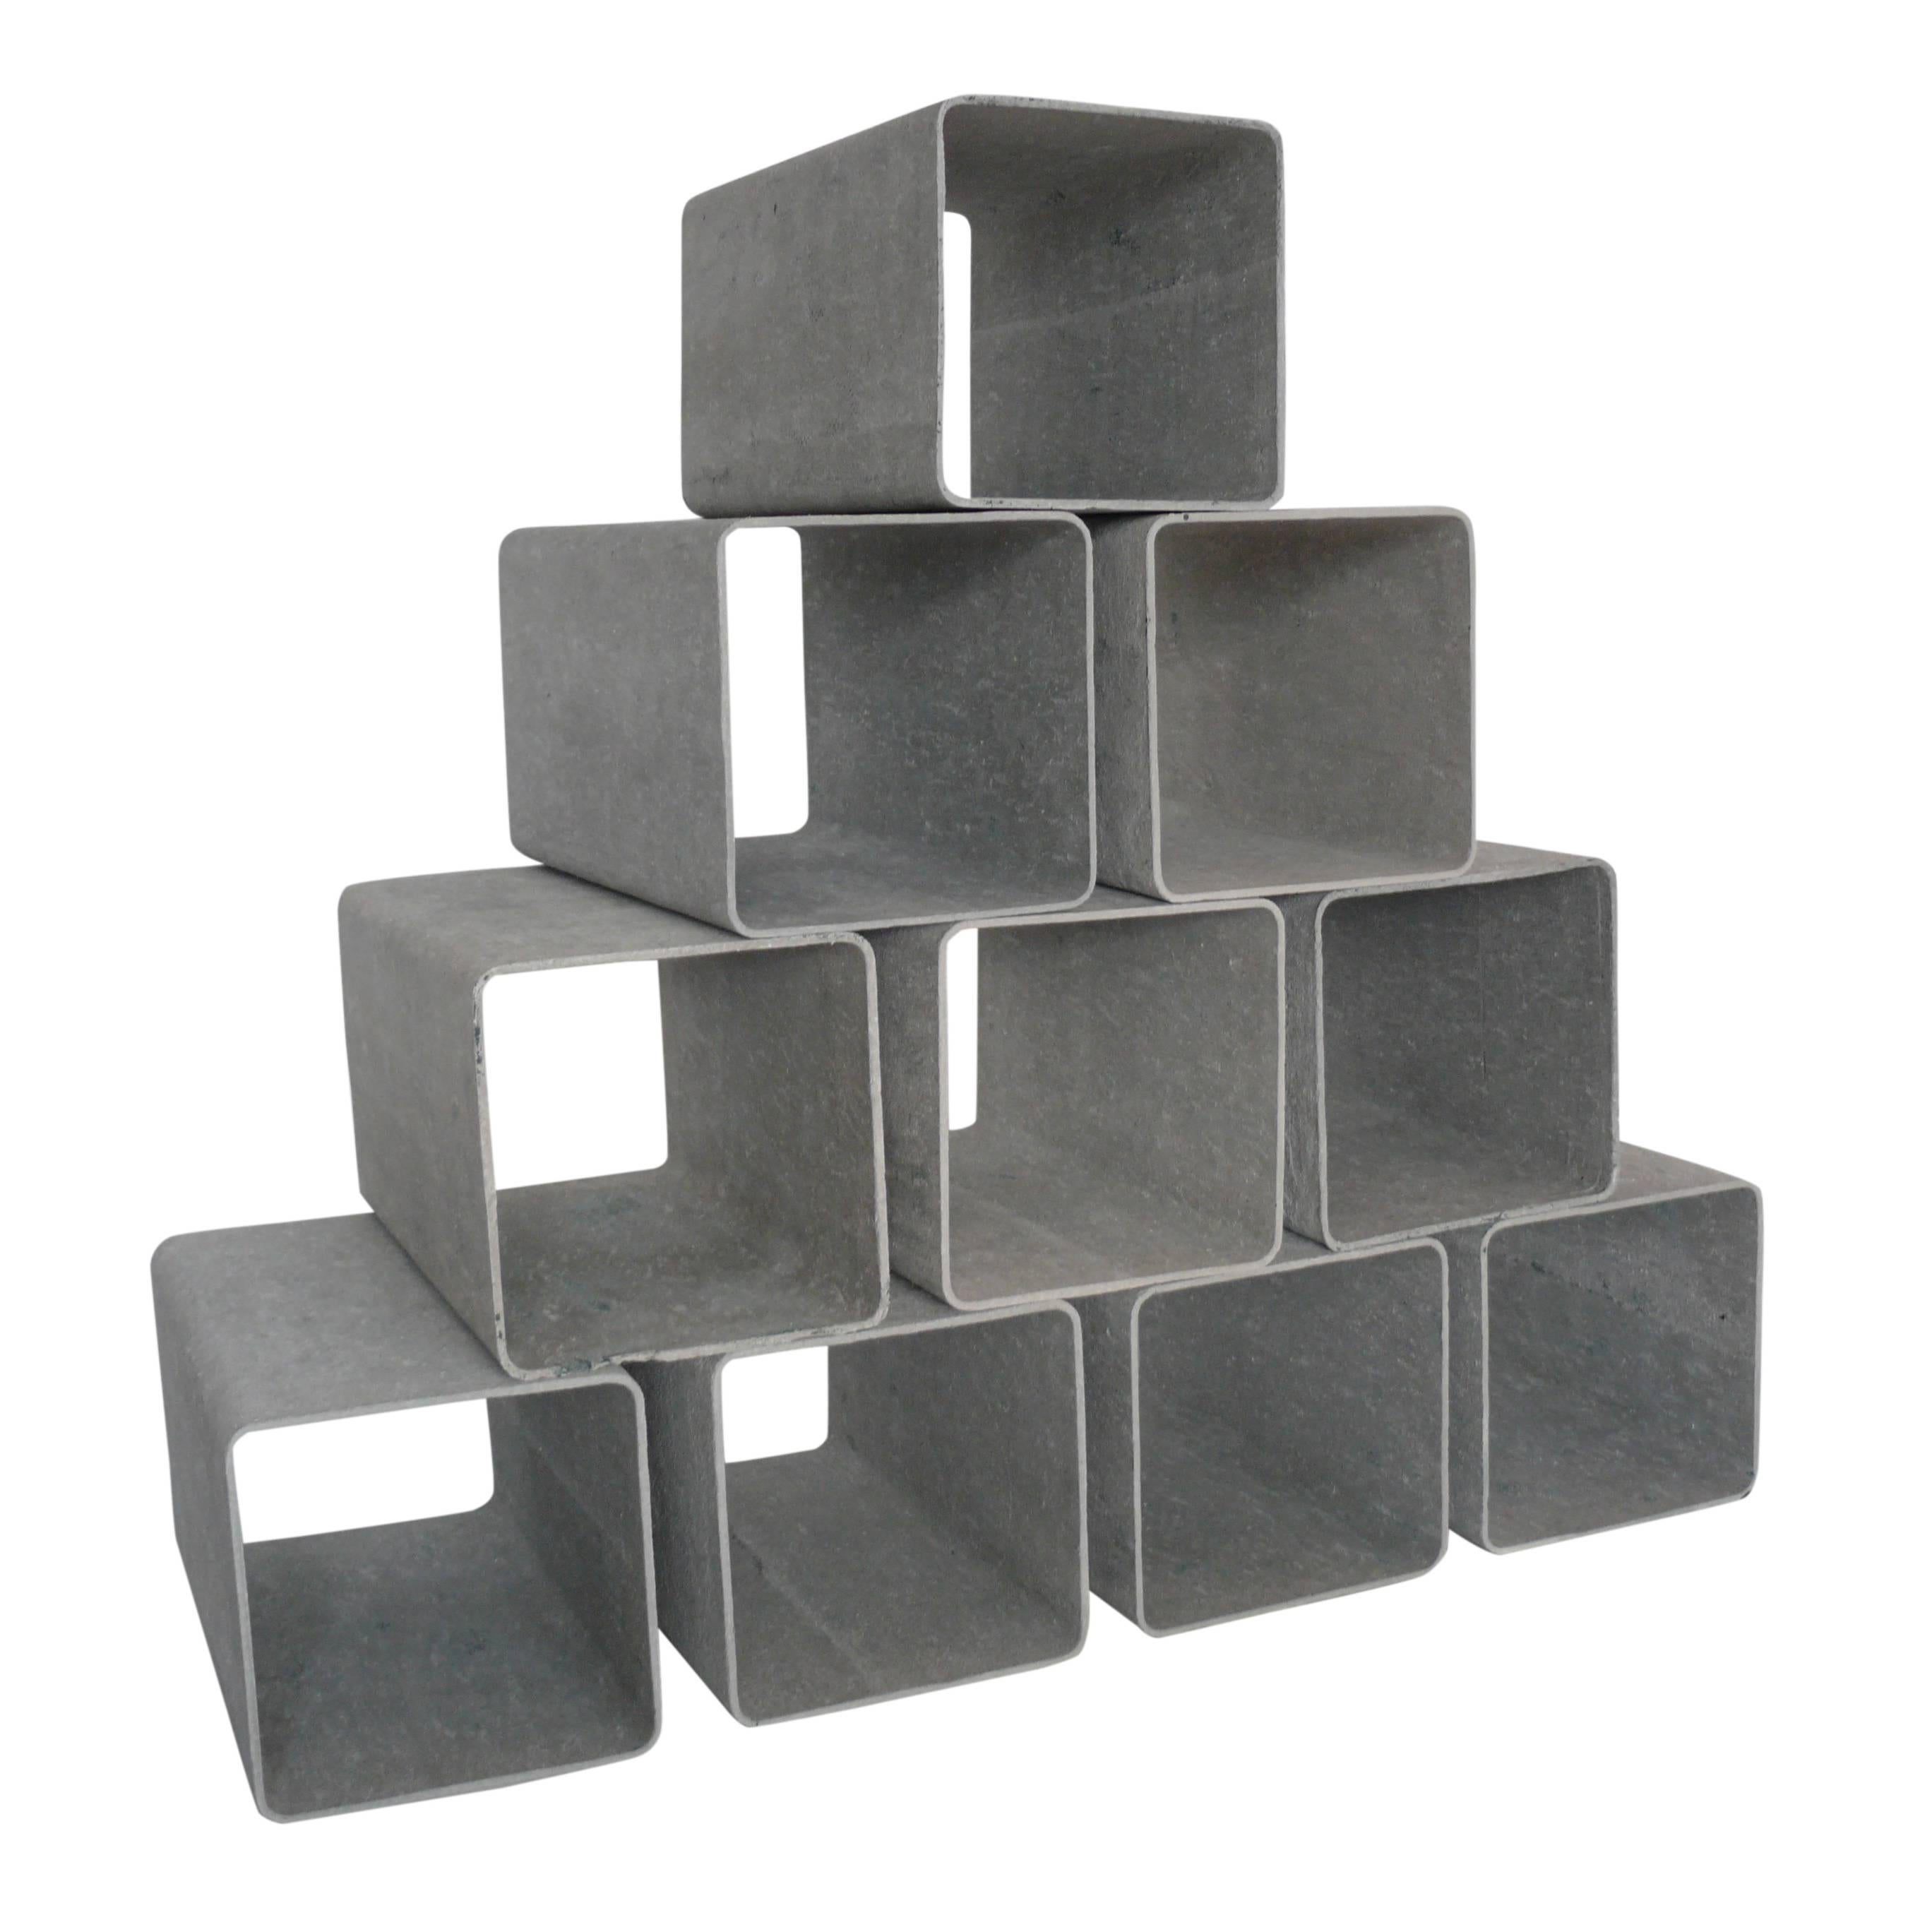 Incredibly rare cement and fiber modular shelving cubes by Willy Guhl. Each cement cube is free standing and light weight enough to rearrange with ease. Would make an incredible room divider, media storage, or display shelves! Great patina.